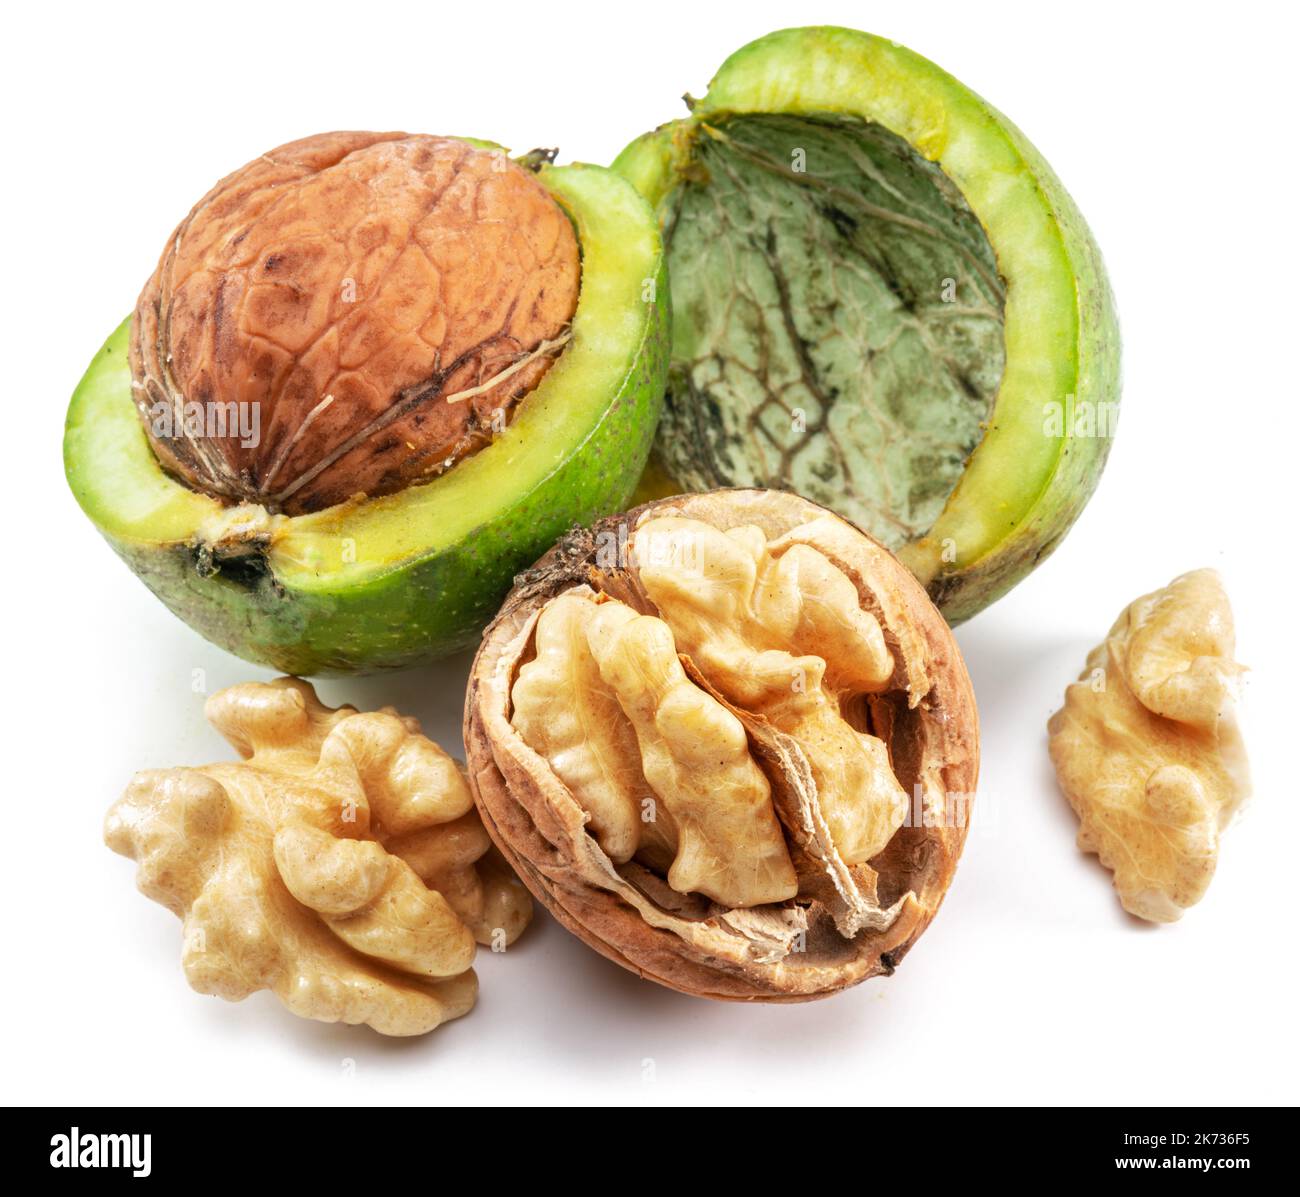 Fresh walnut in green husk, part of husk and walnut kernel isolated on white background. Stock Photo